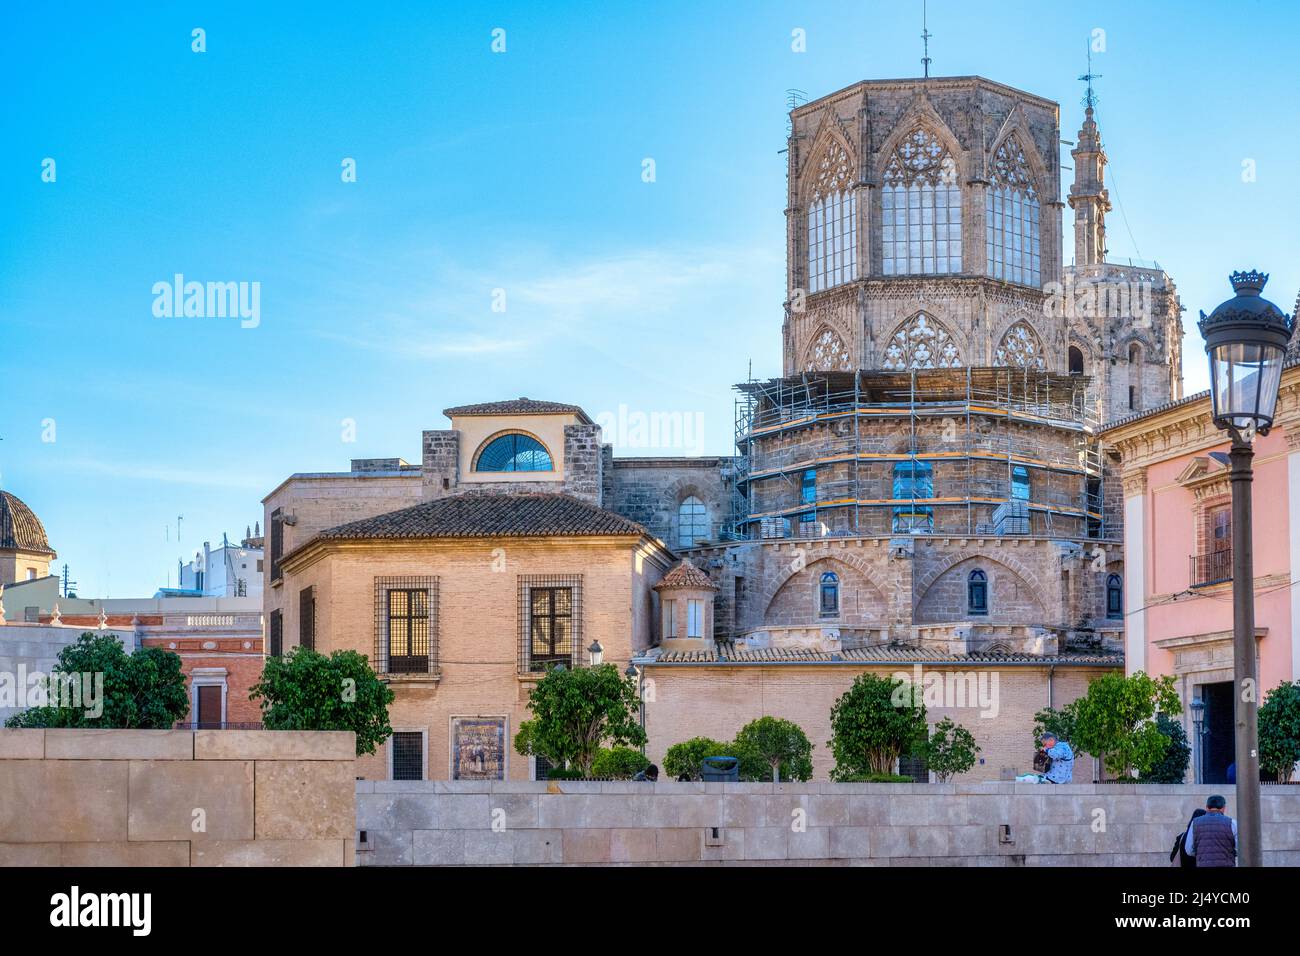 Exterior architecture of the Valencia Cathedral which has a predominantly Gothic style. Incidental people in the old town. This area is a major touris Stock Photo